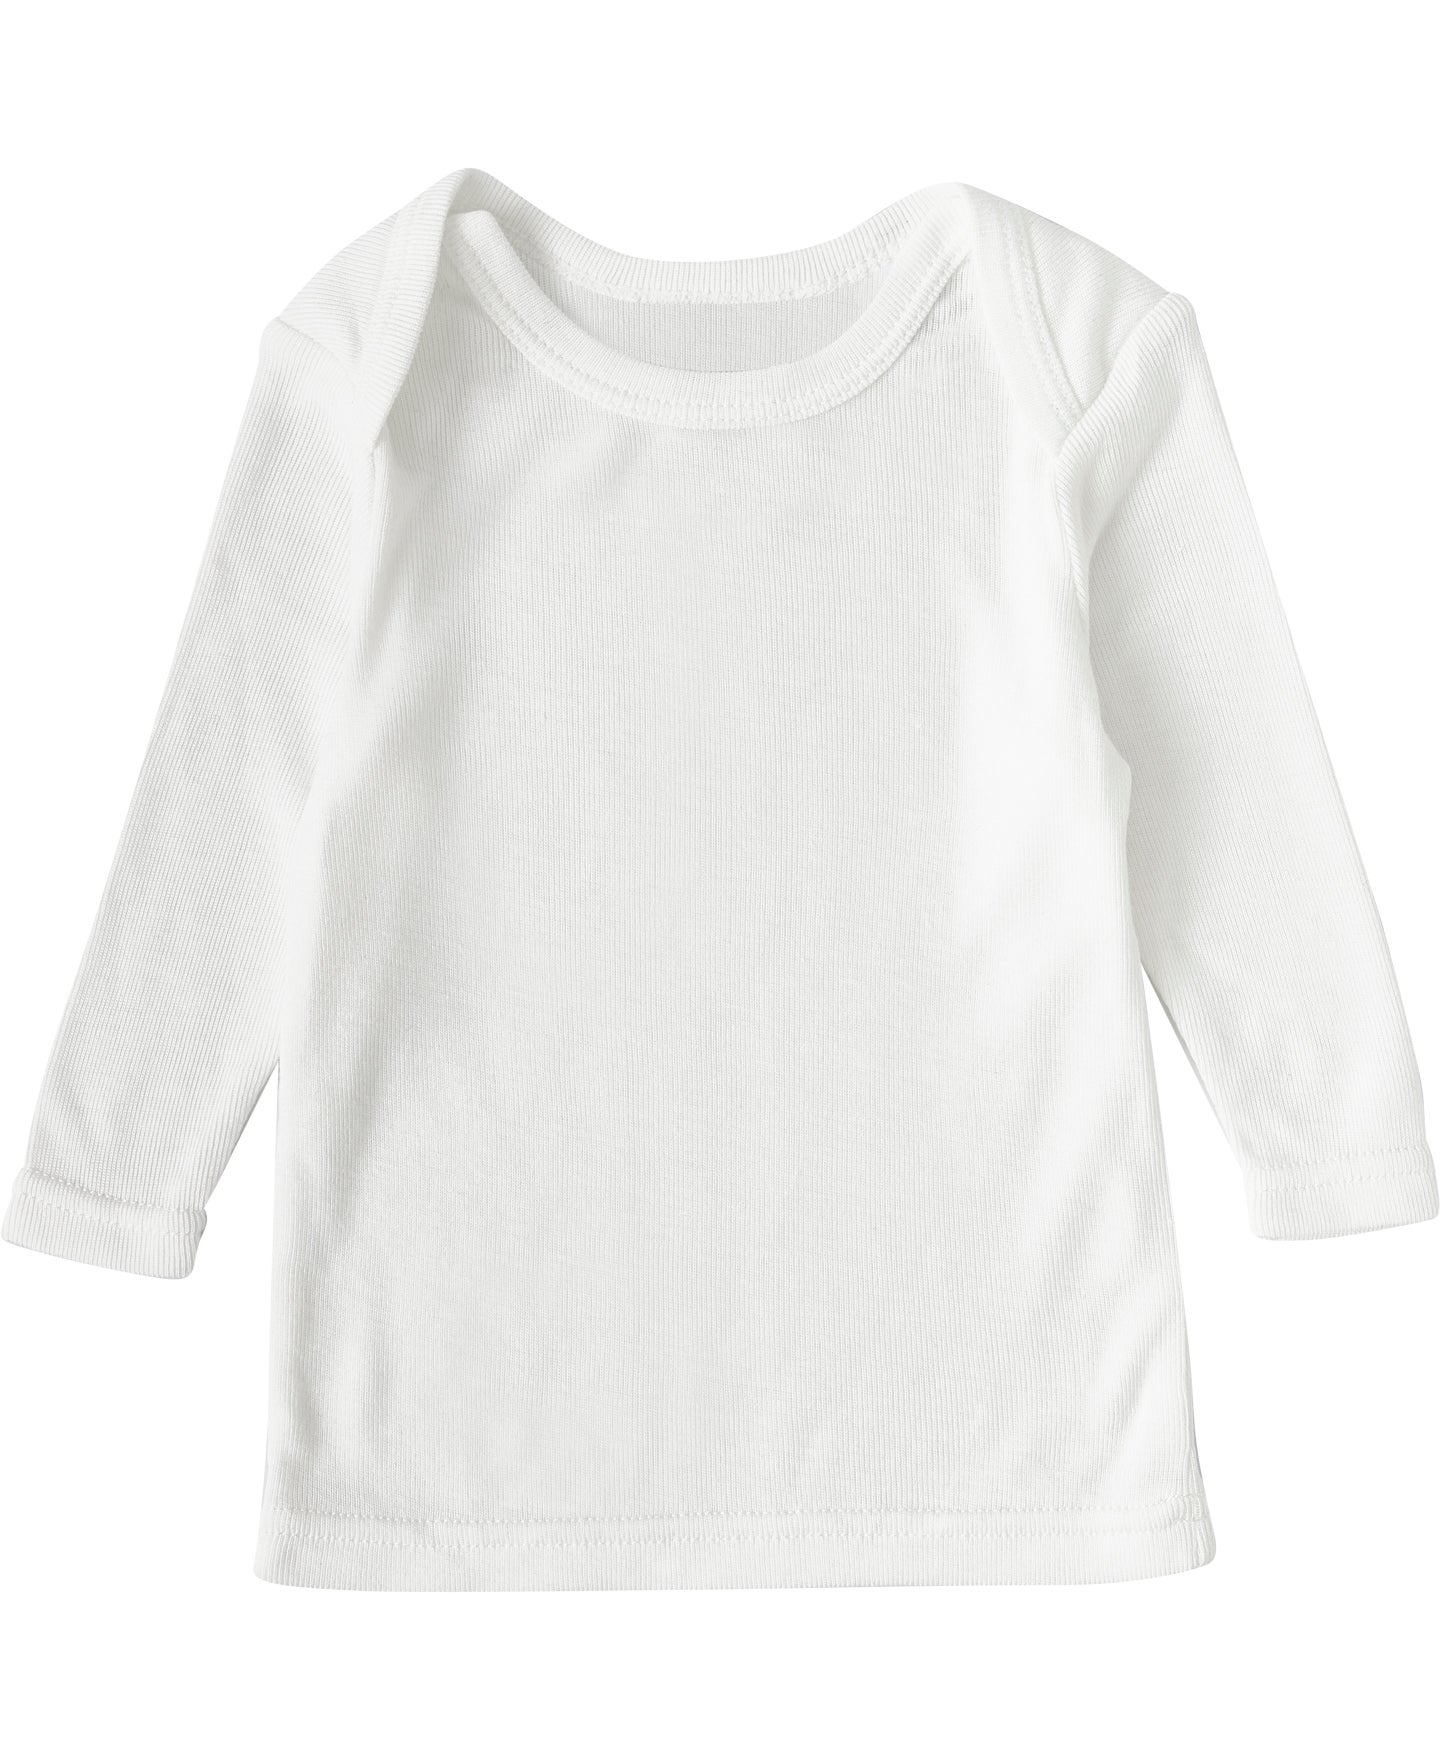 Infant Thermo Long Sleeve Thermal Top in White